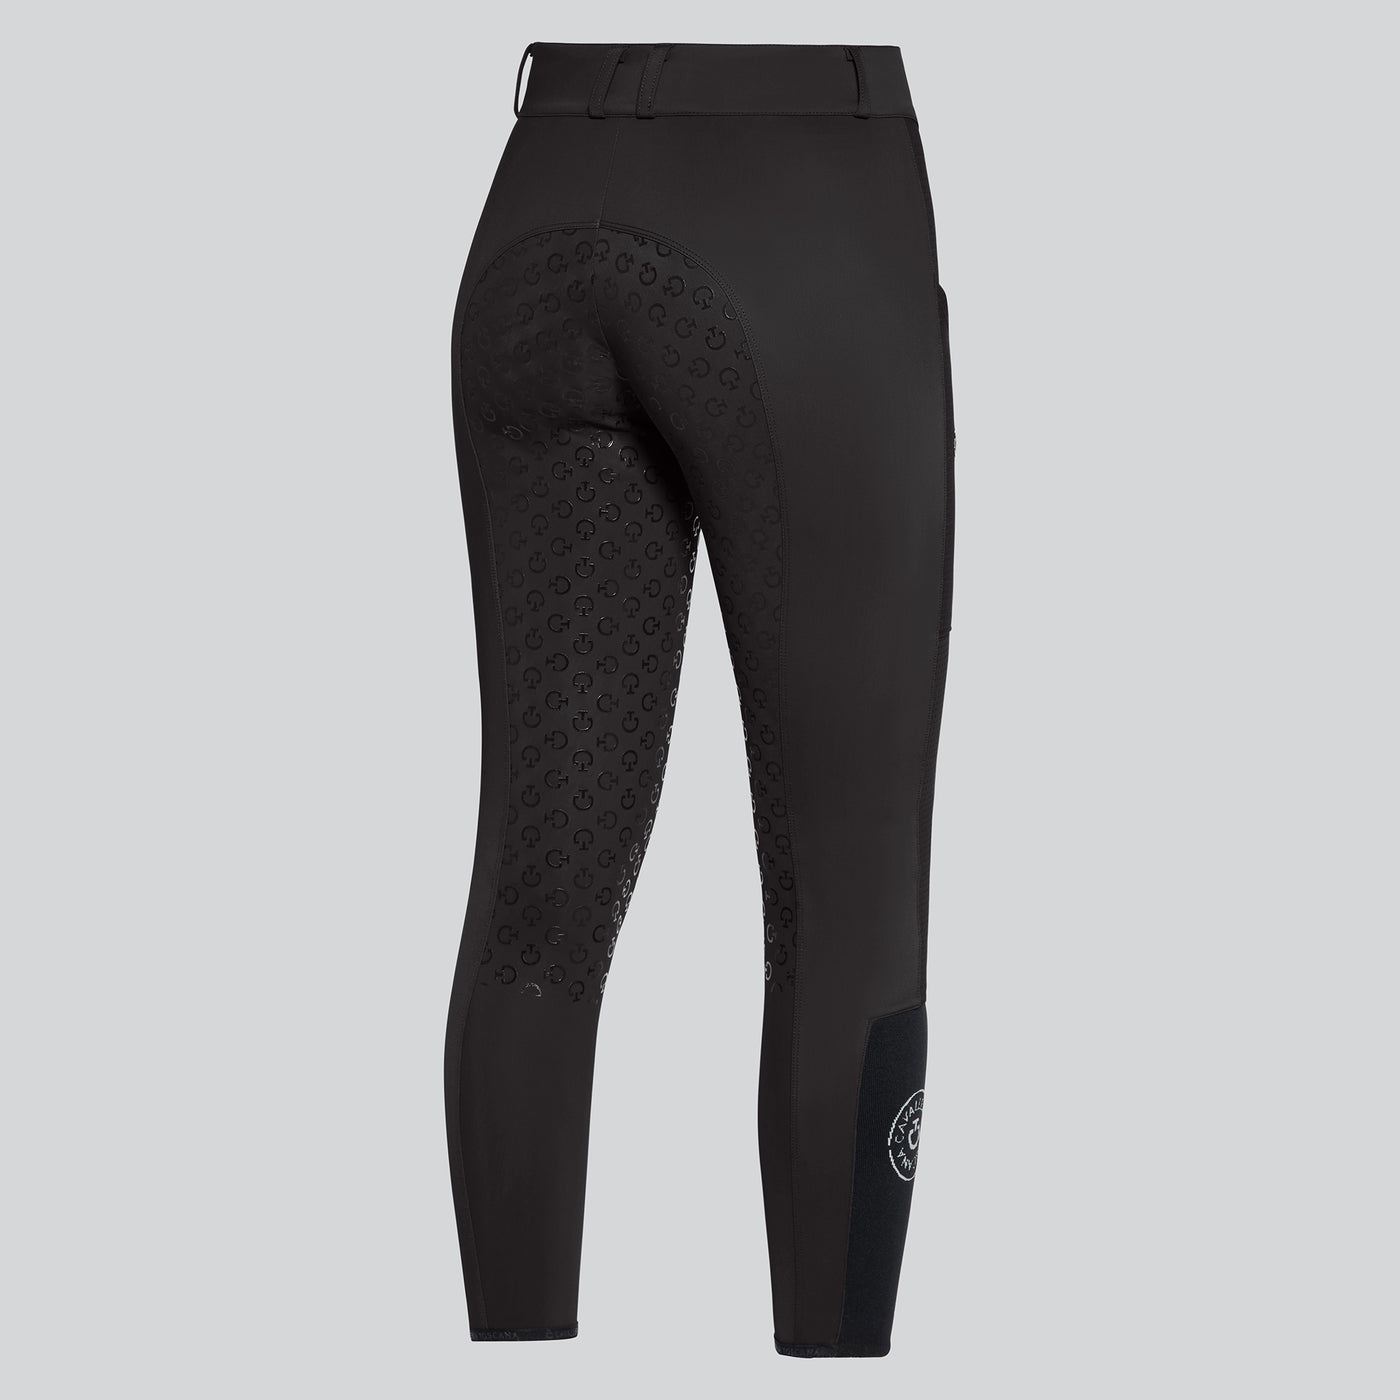 CT Perforated Insert F/G Breeches